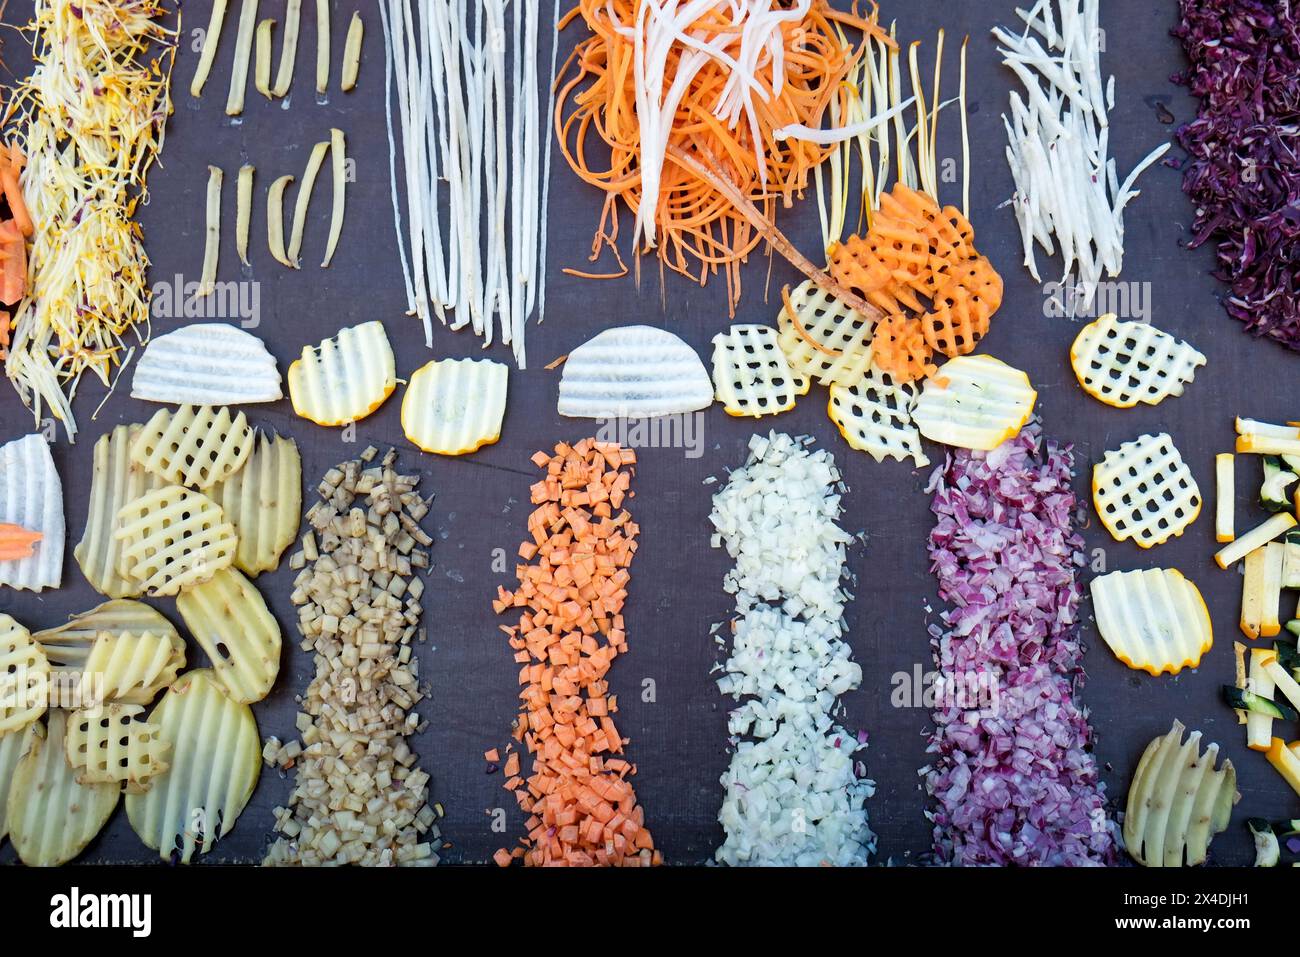 Munich, Germany. Farmers market. Display of chopped vegetables Stock Photo